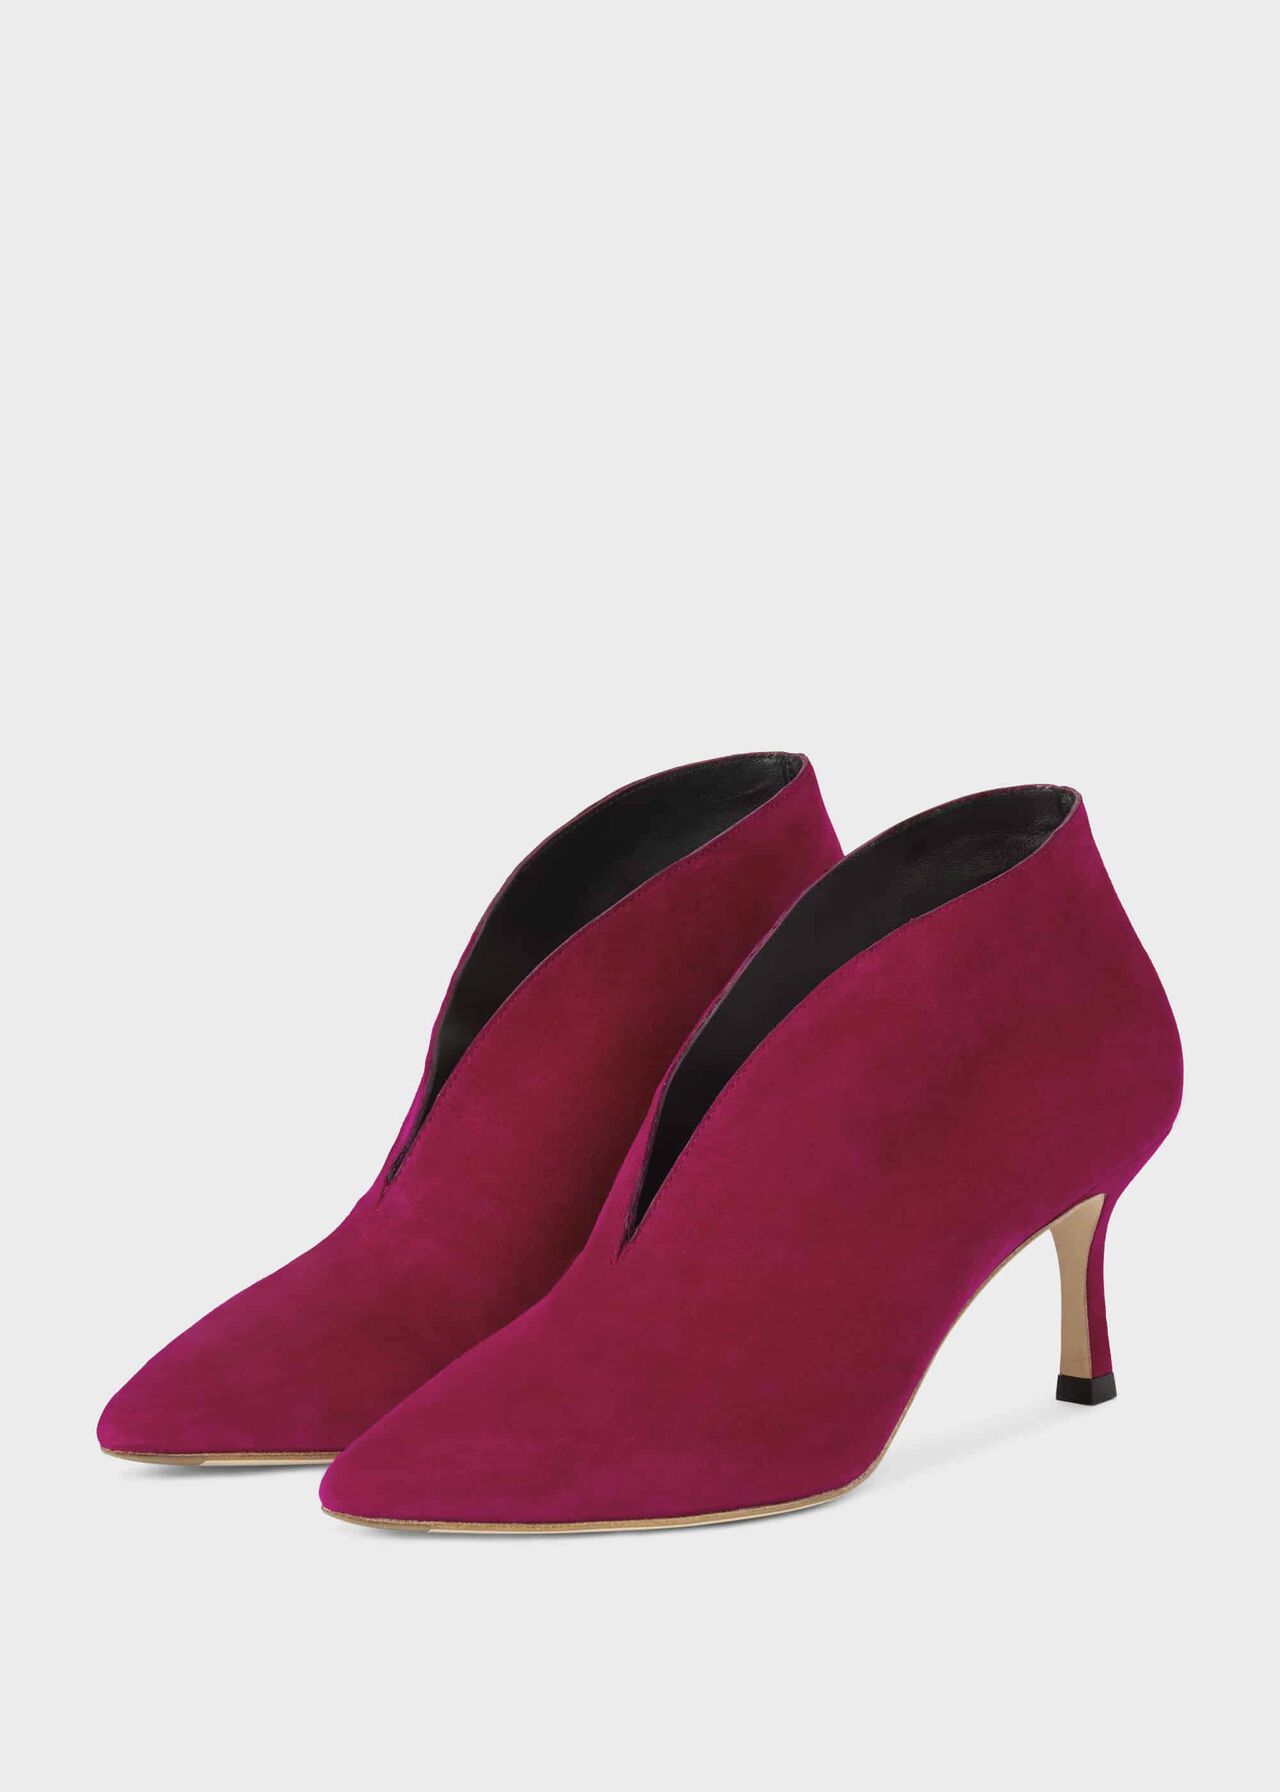 Sienna Suede Stiletto Ankle Boots, Raspberry, hi-res